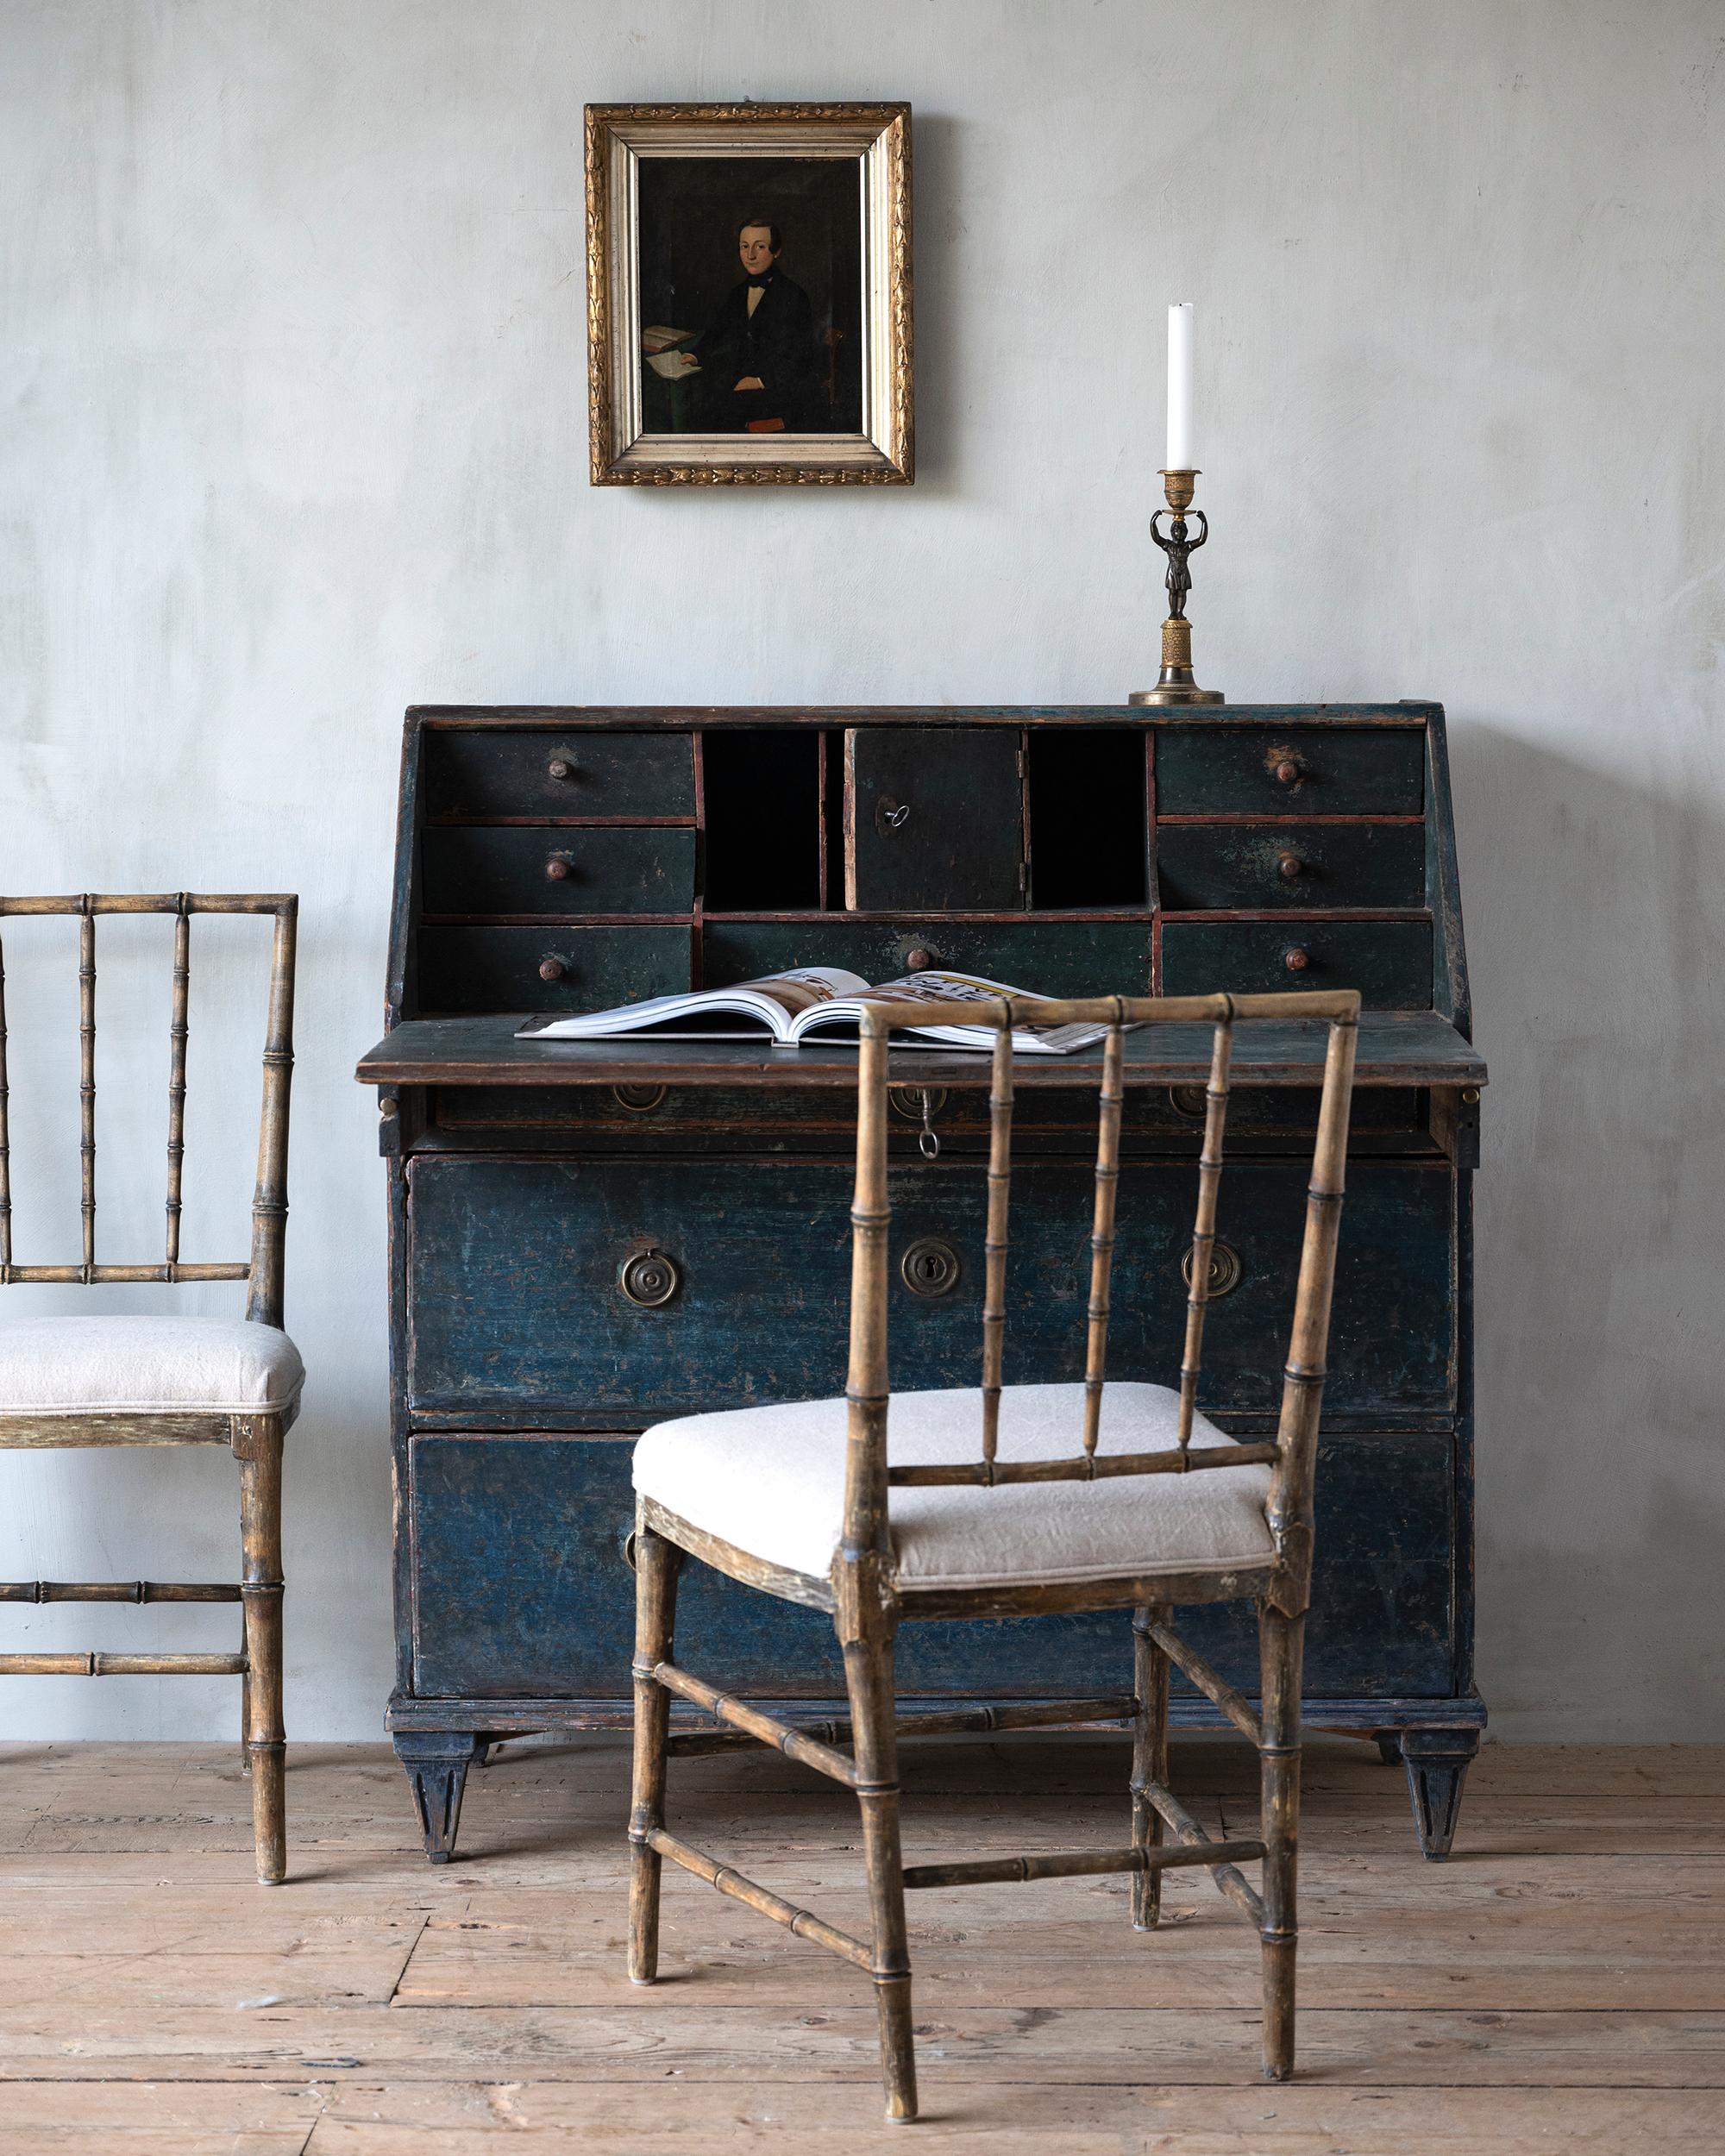 Fine 18th century Swedish Gustavian secretair in it's original finish with great patina and character. Ca 1790 Sweden. 

Additional measurements: Hight to desk 74 cm, Depth with desk folded out: 80 cm. 